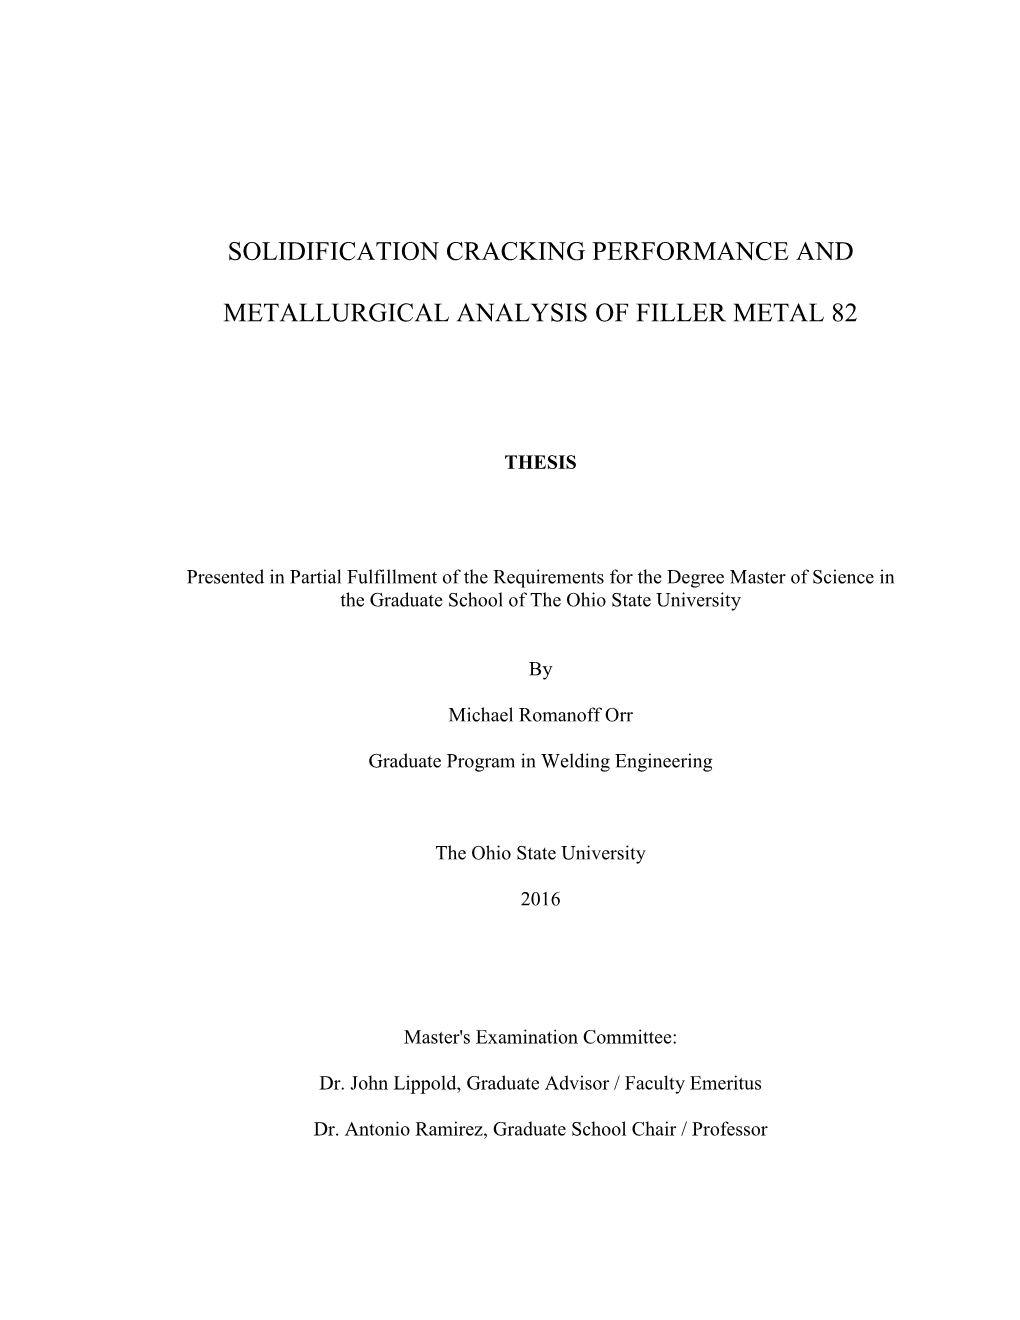 Solidification Cracking Performance and Metallurgical Analysis of Filler